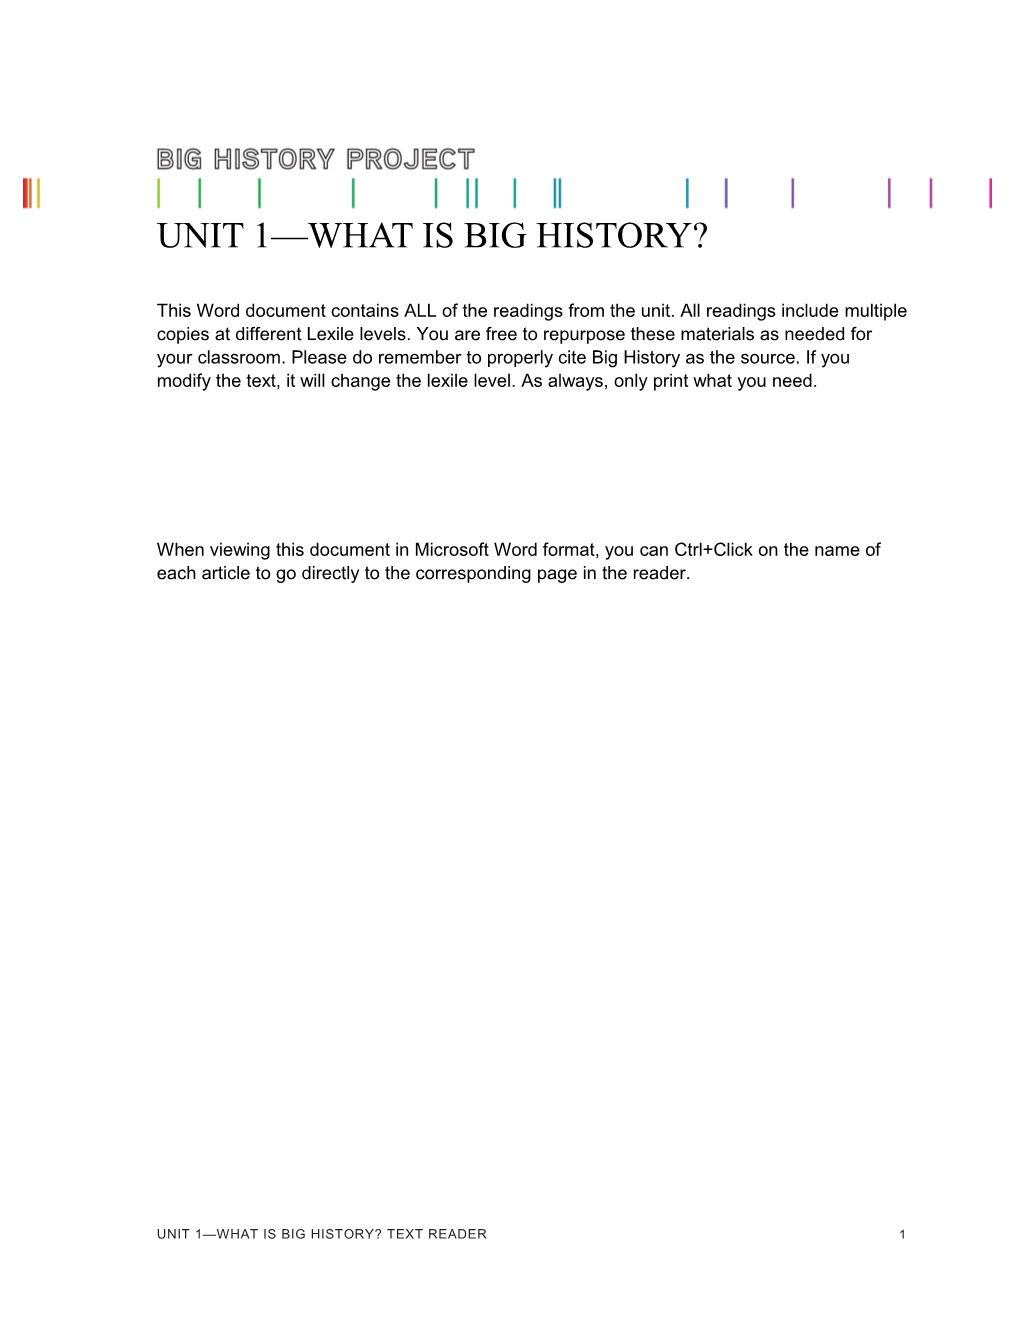 Unit 1 WHAT IS Big History?